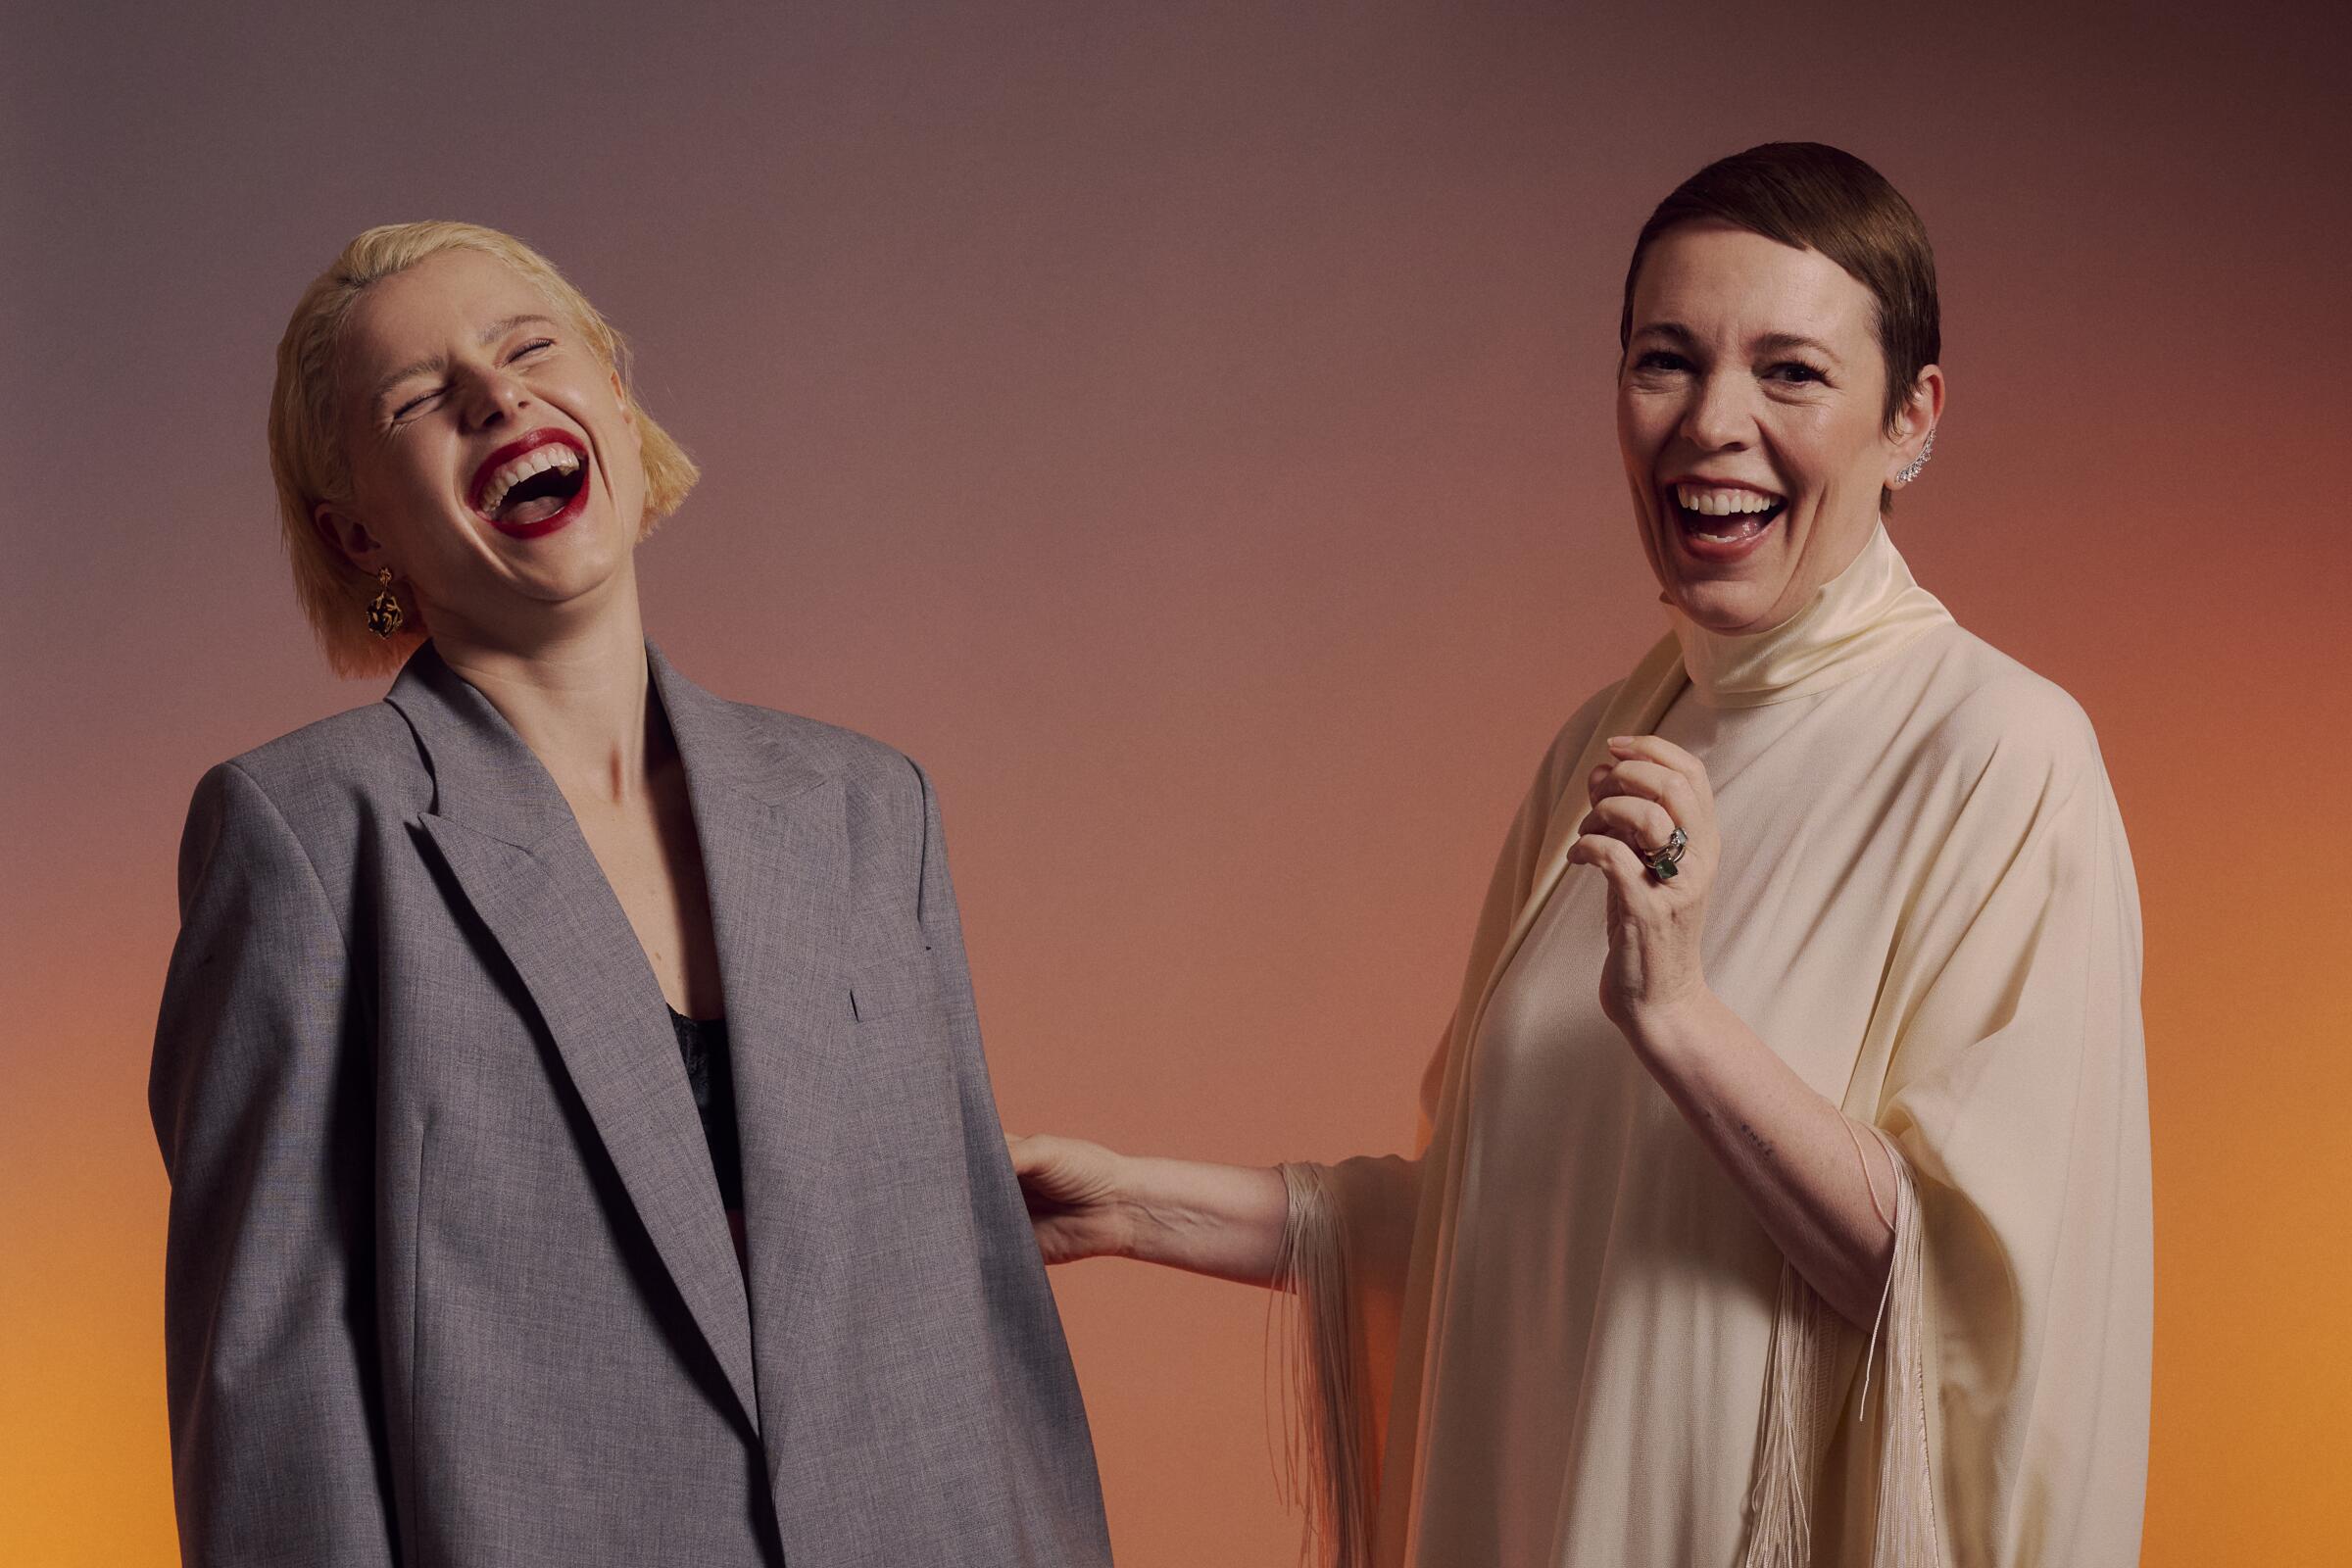 Two women laugh together.